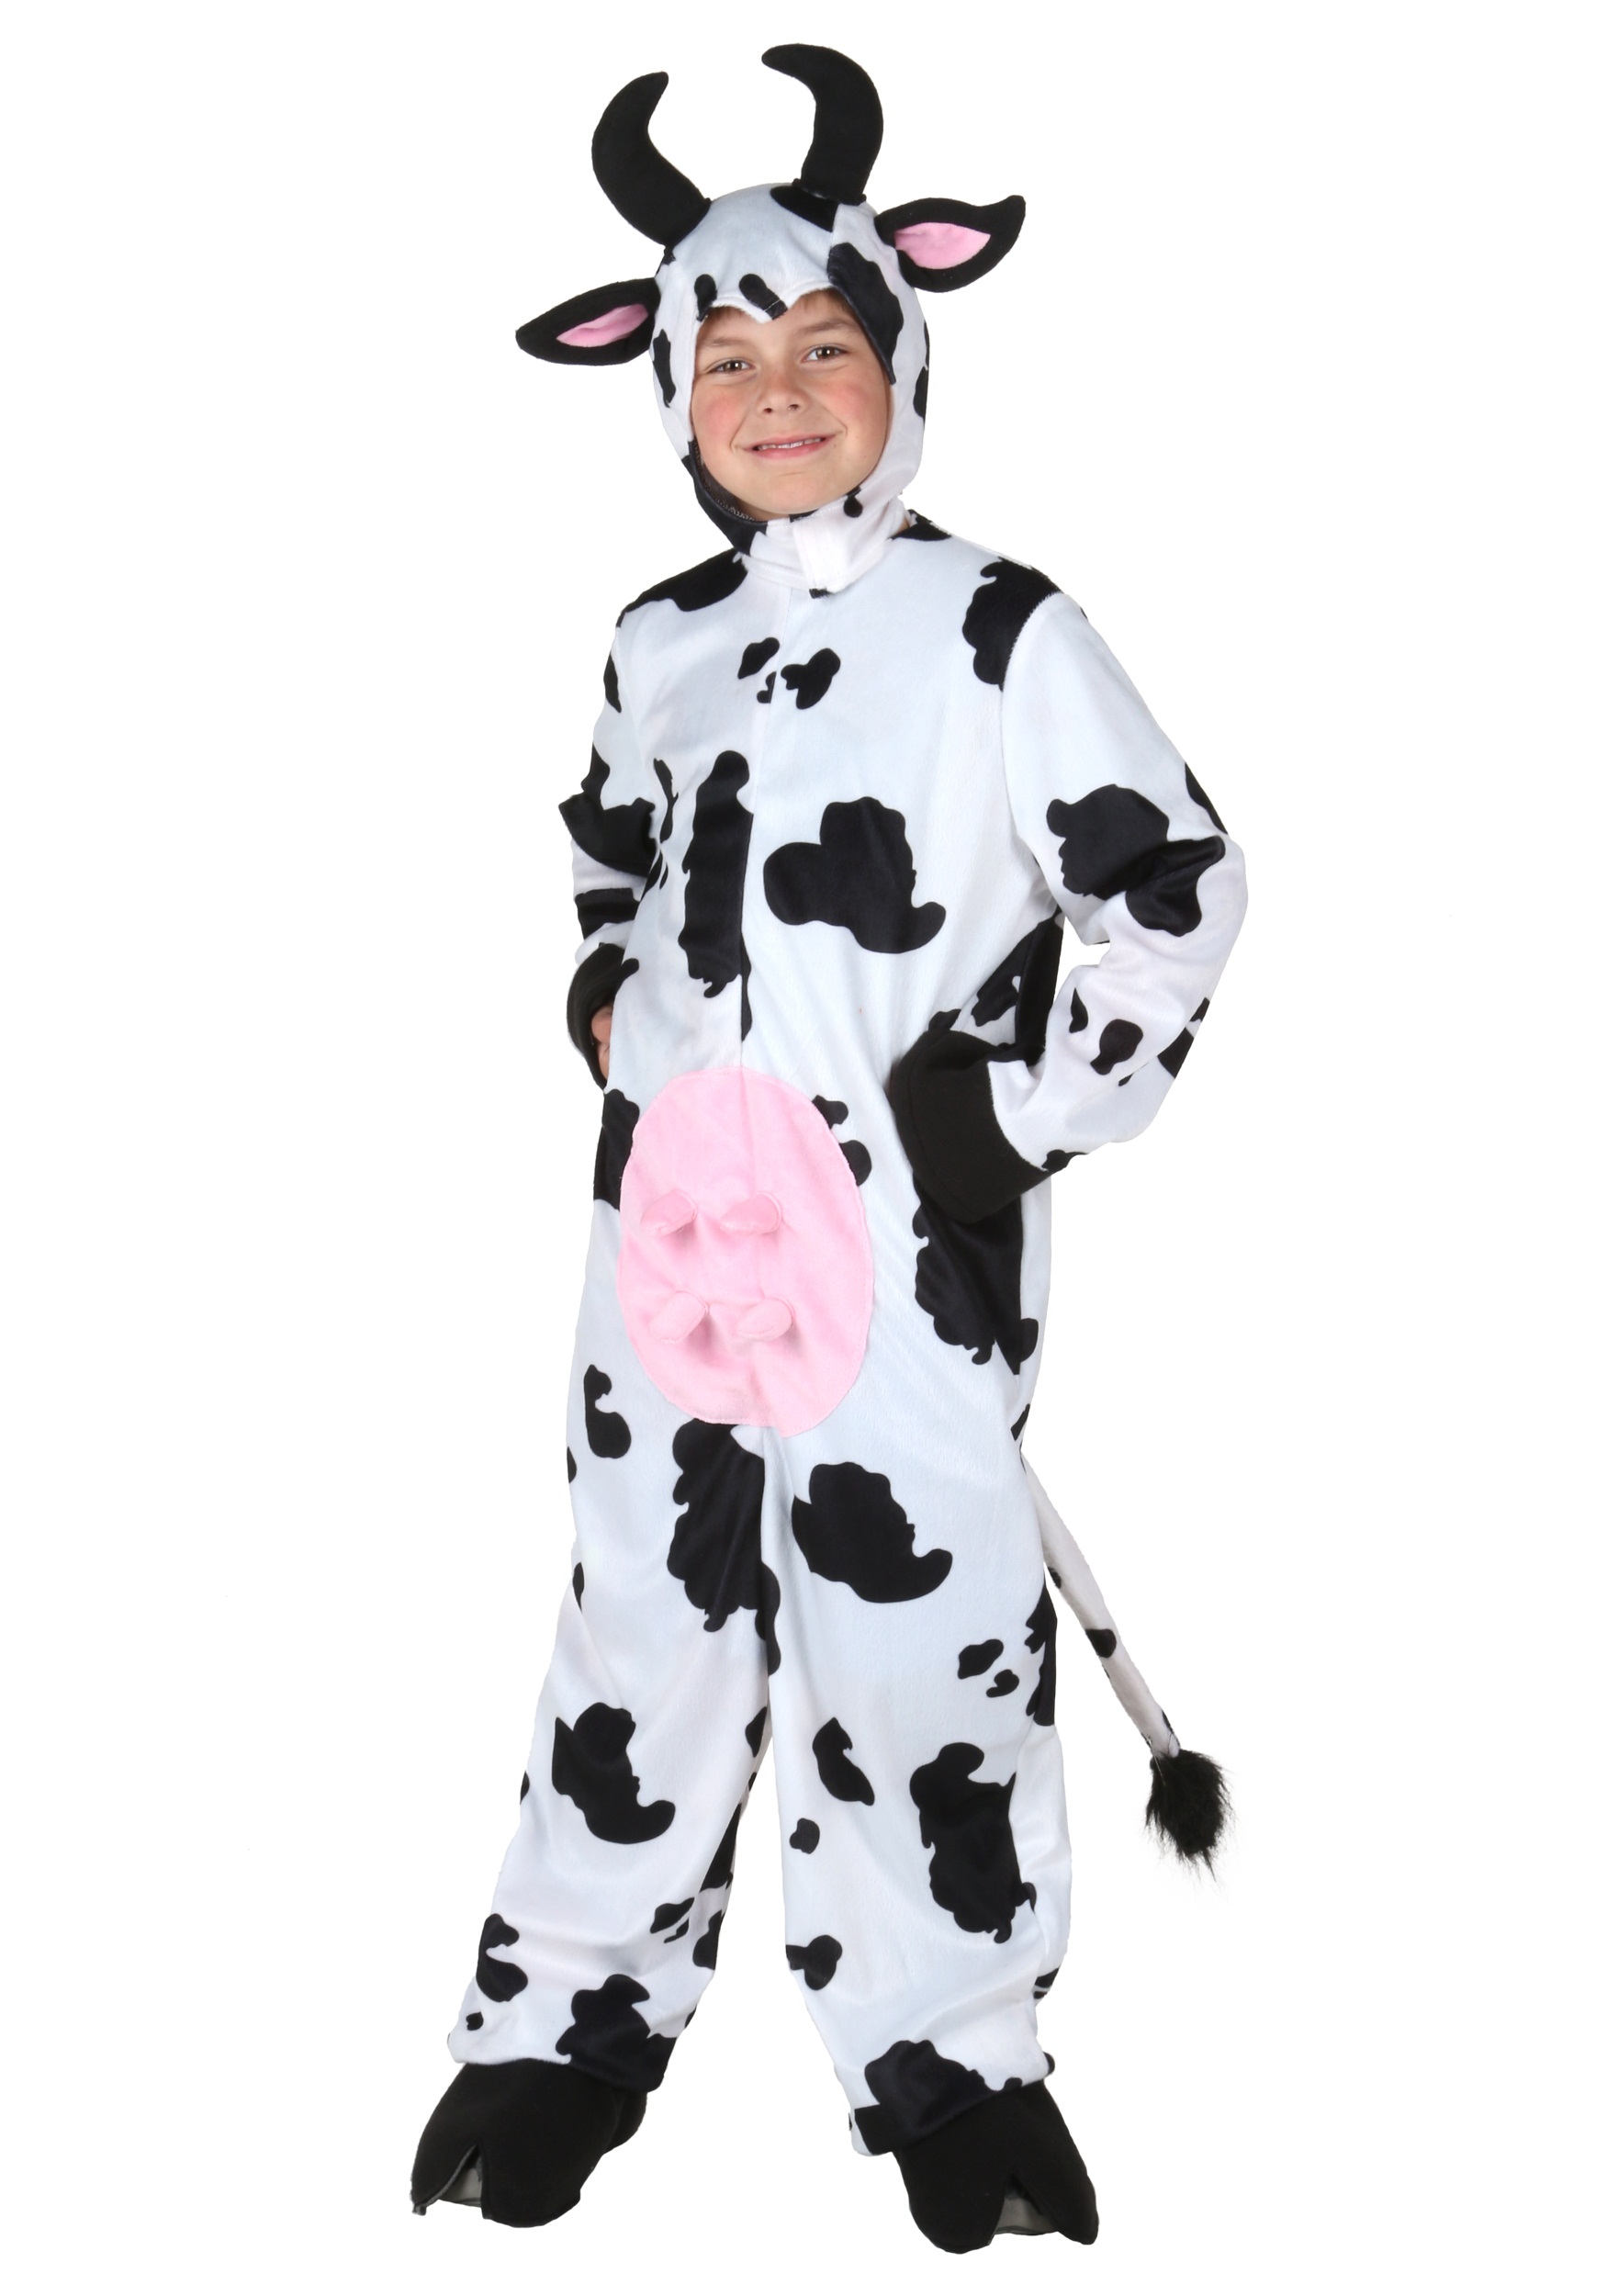 Photos - Fancy Dress Deluxe FUN Costumes  Cow Costume for Kids Black/White FUN2930CH 